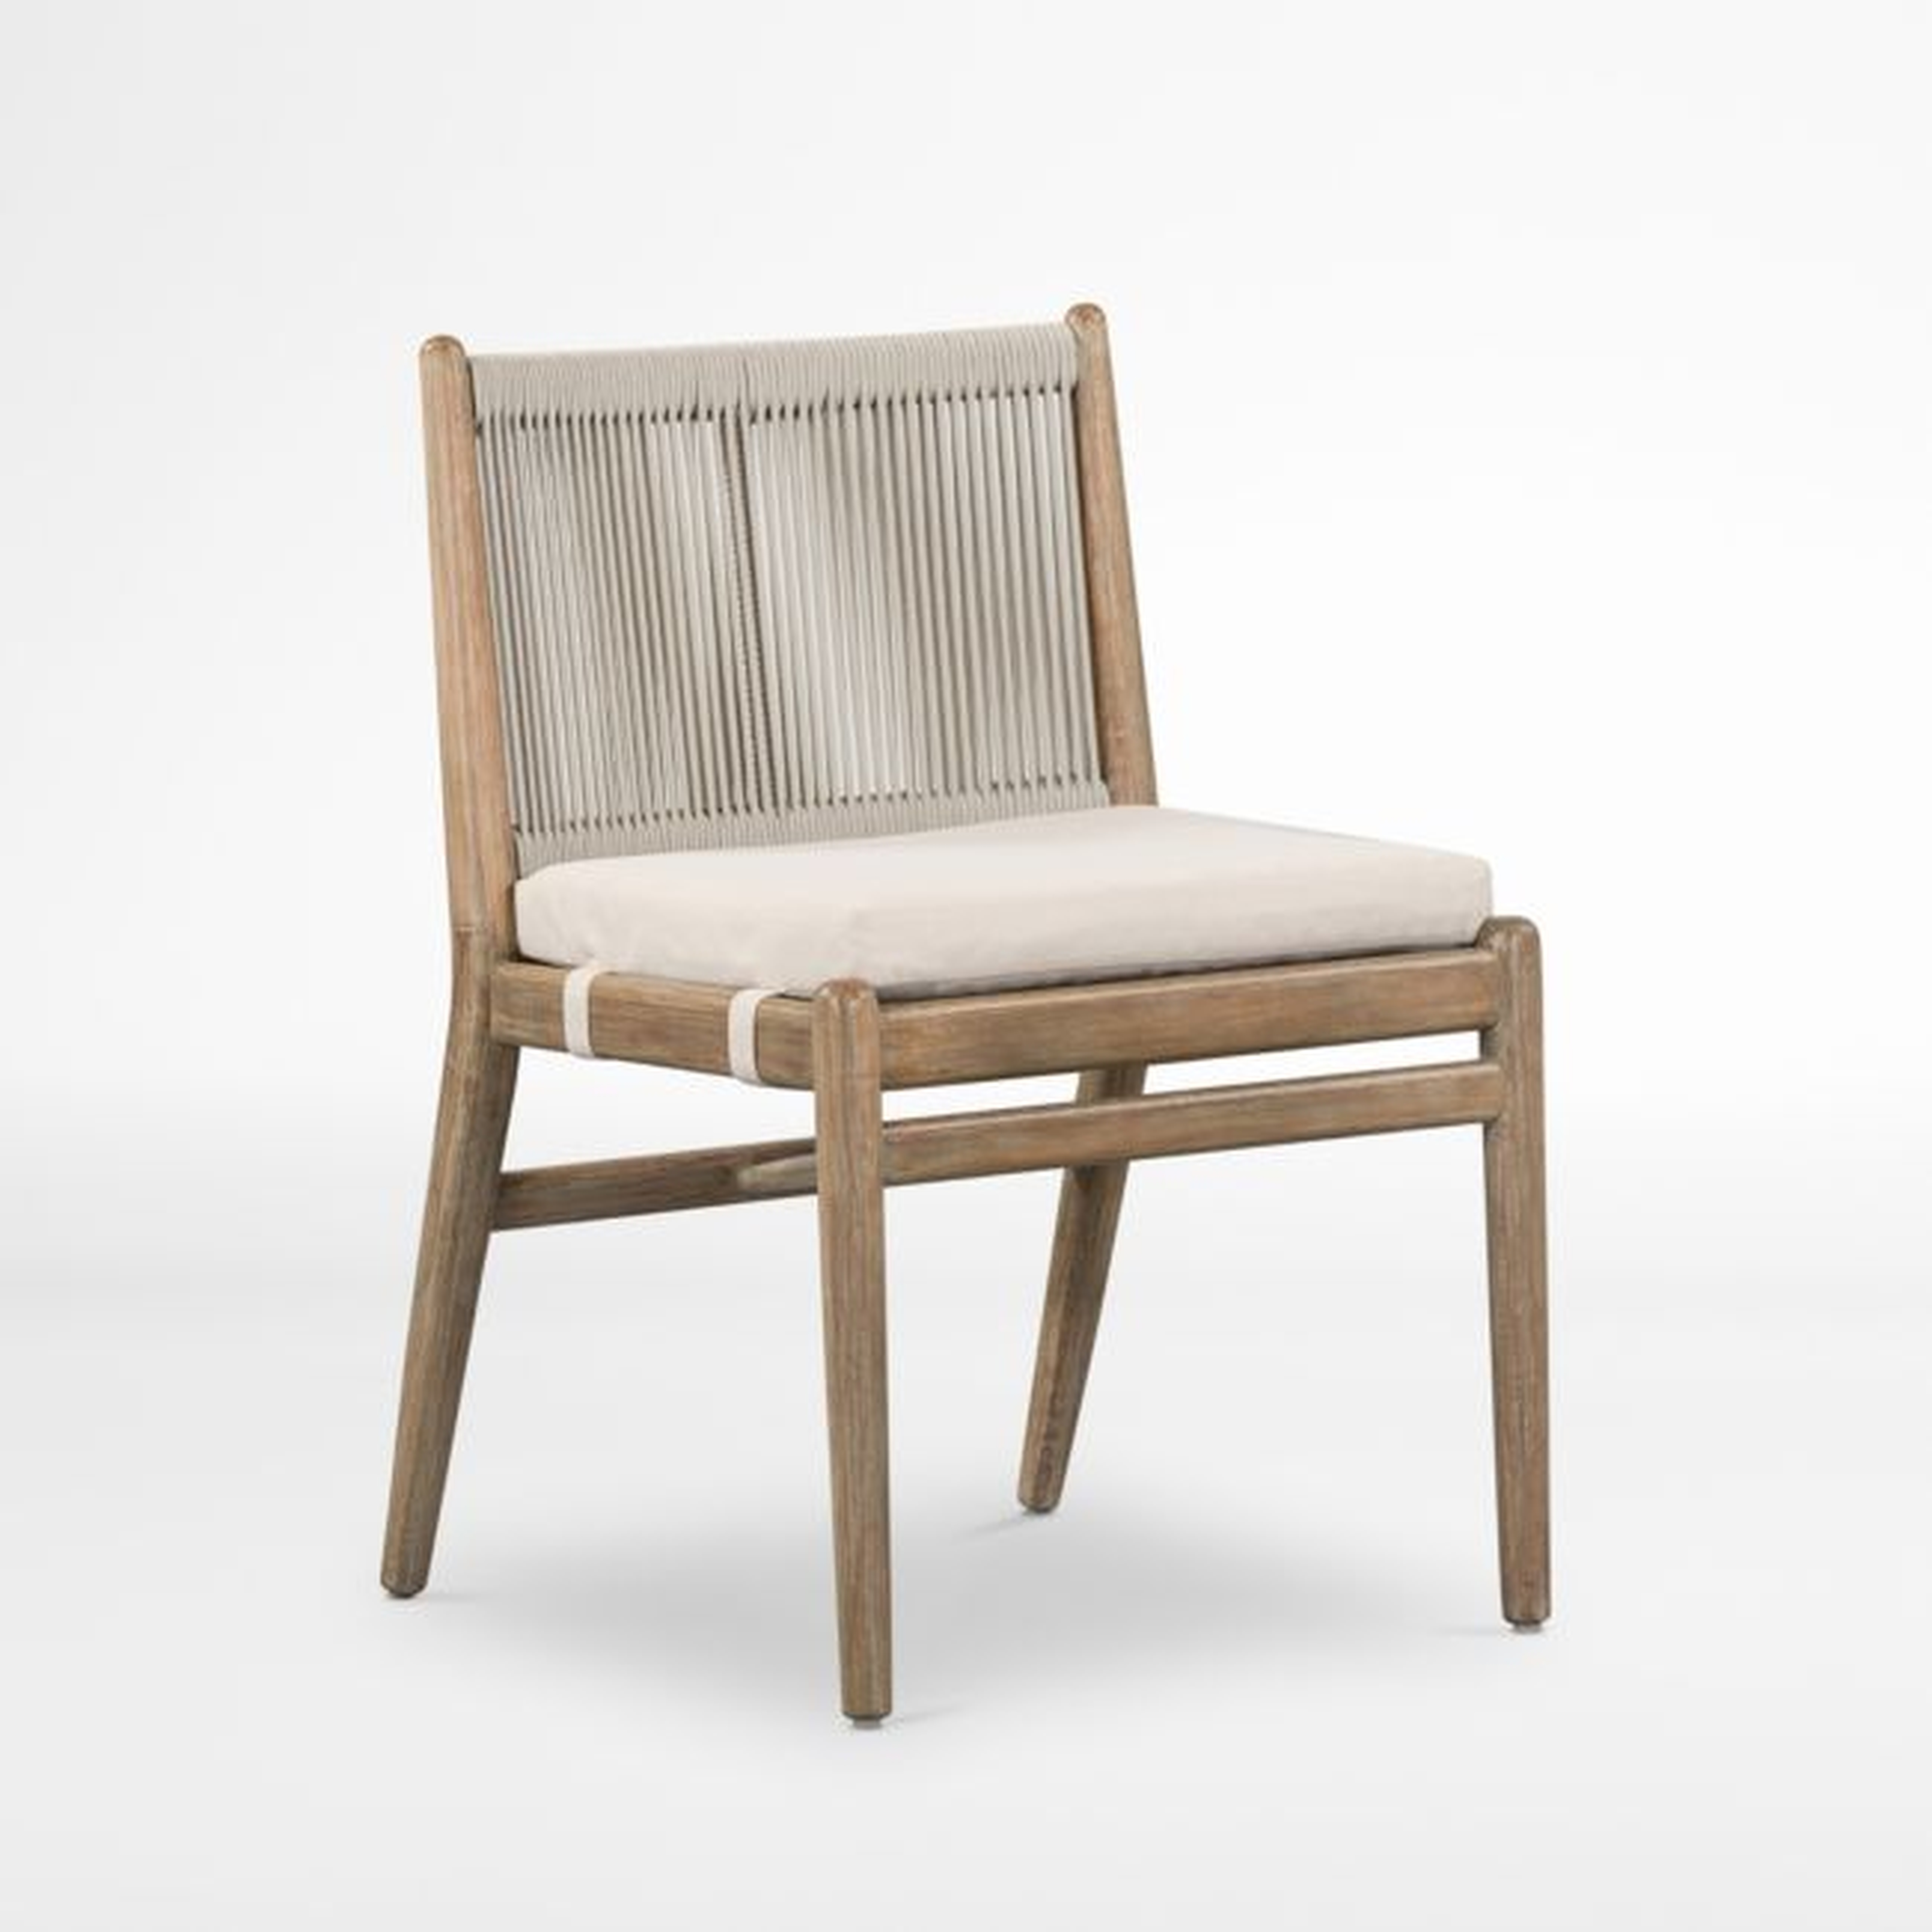 Oakmont Outdoor Dining Chair - Crate and Barrel